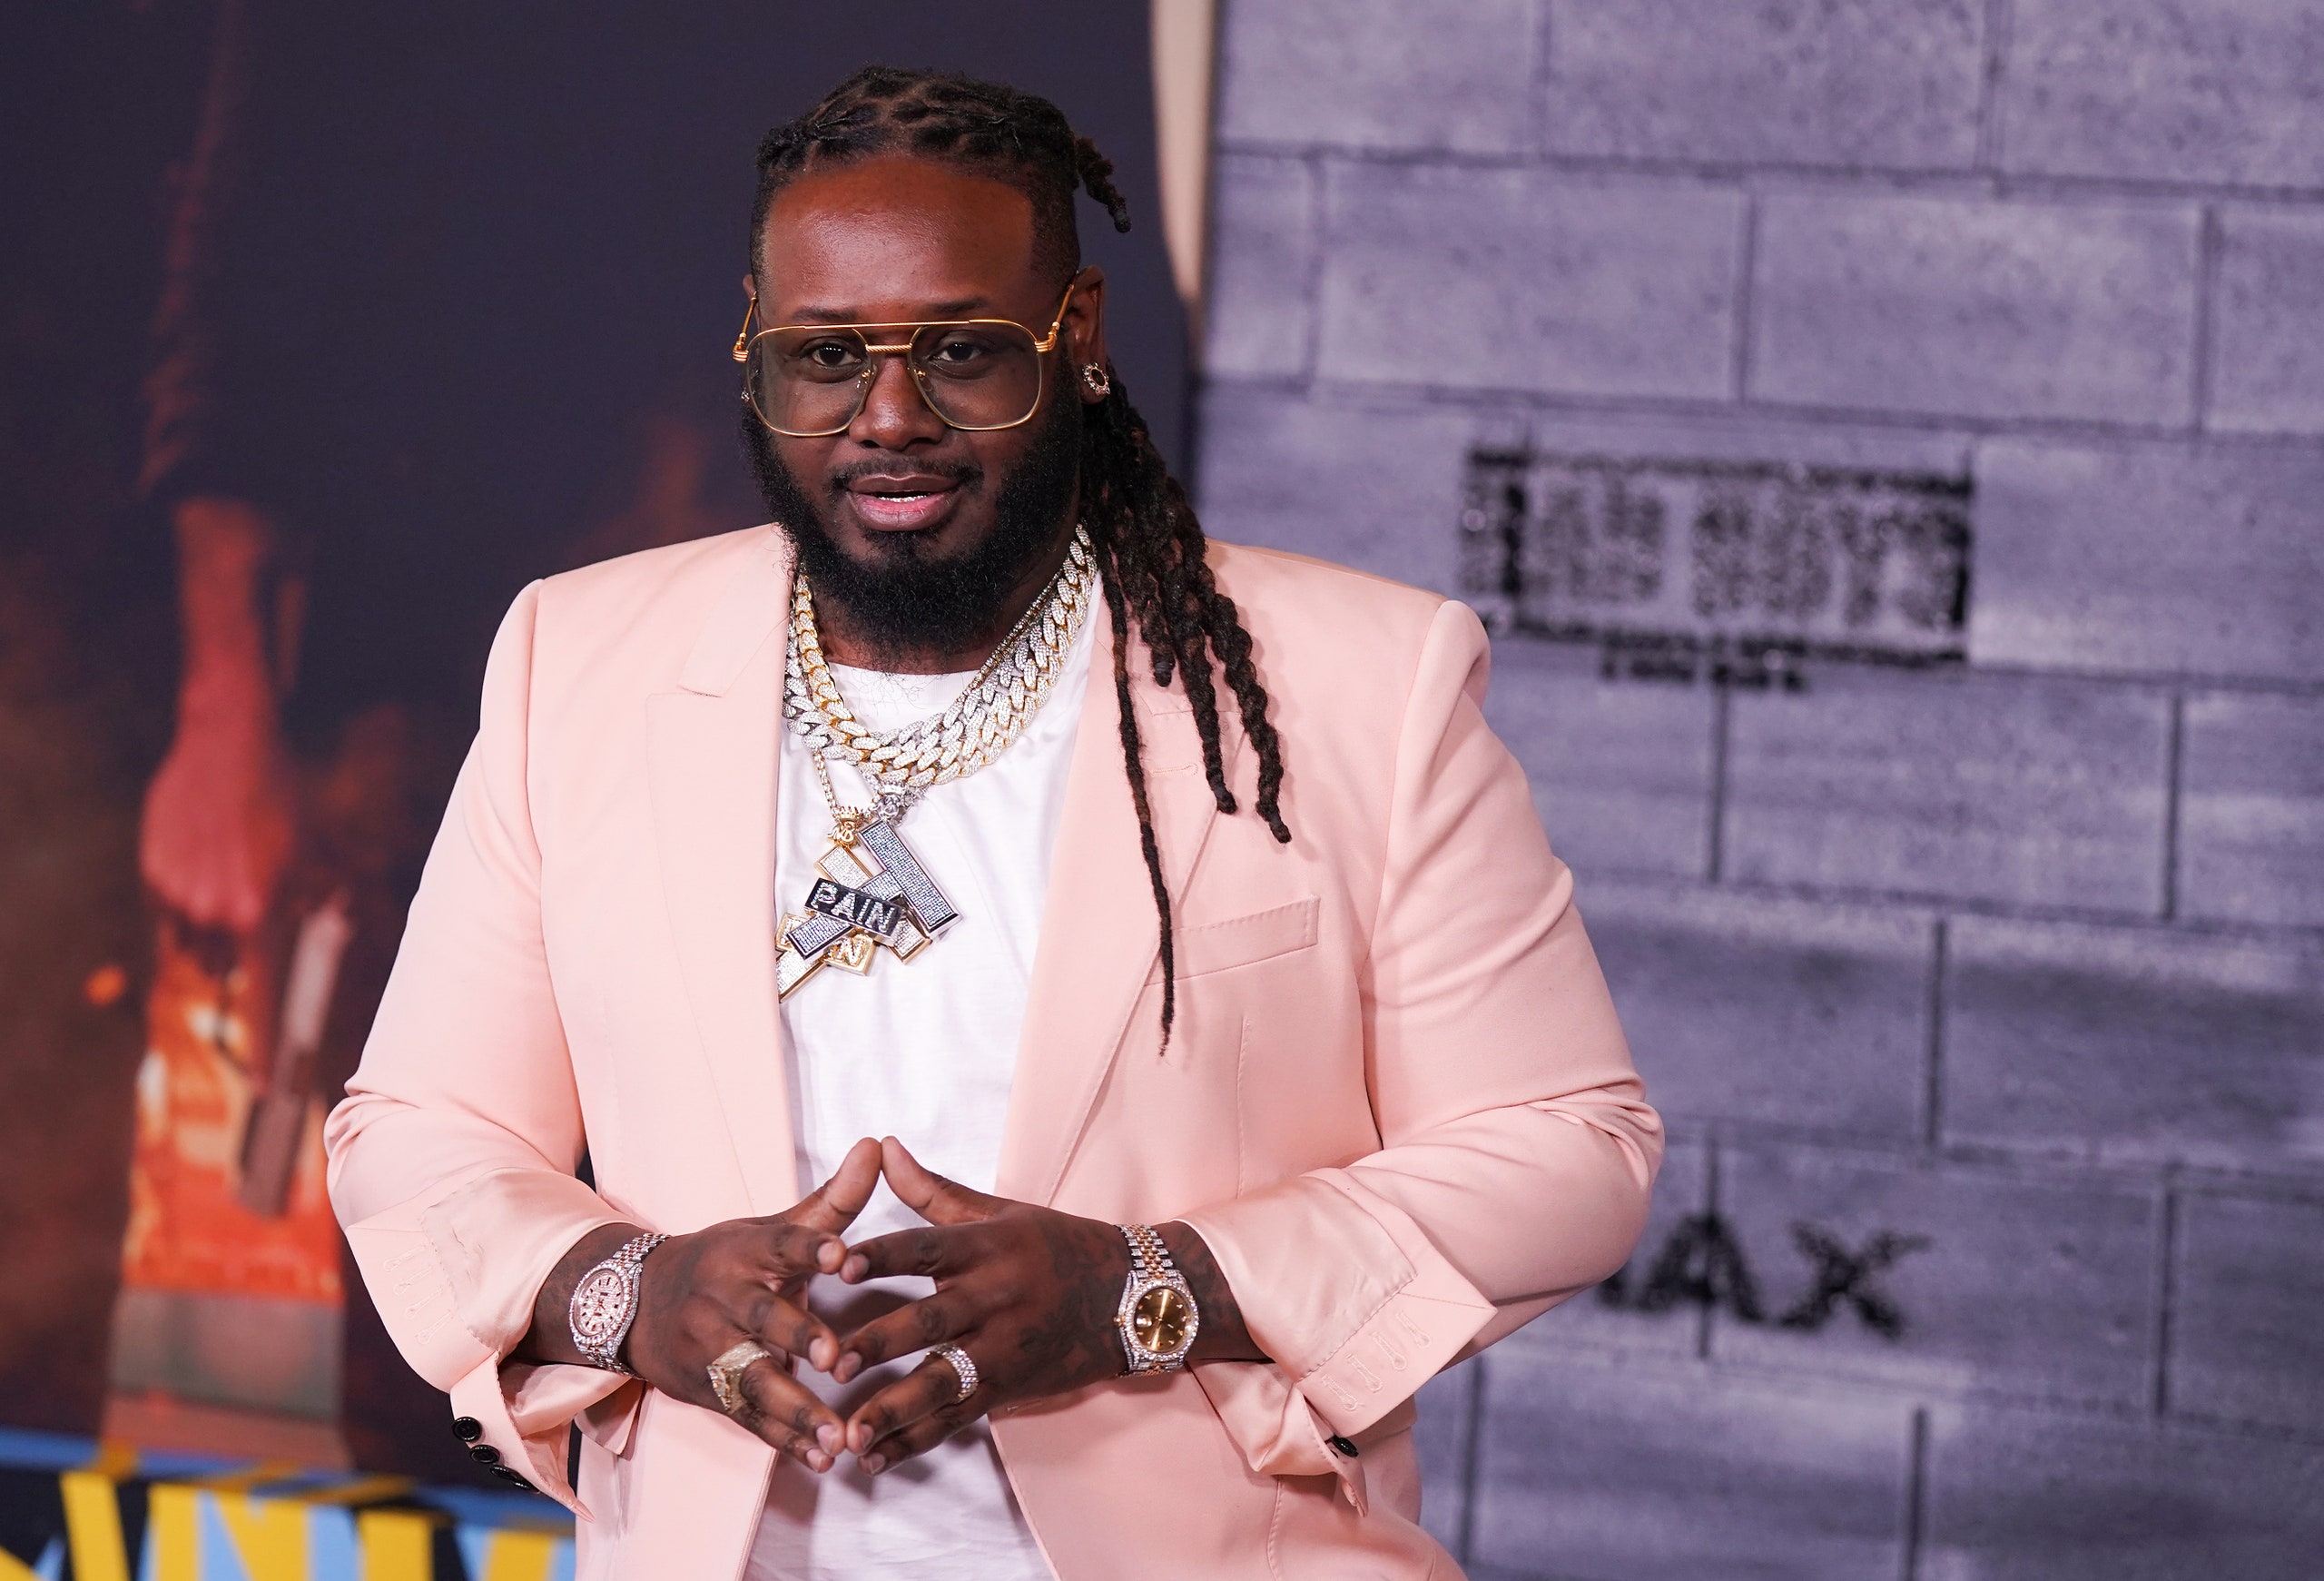 Why Did T Pain Stop Making Music?